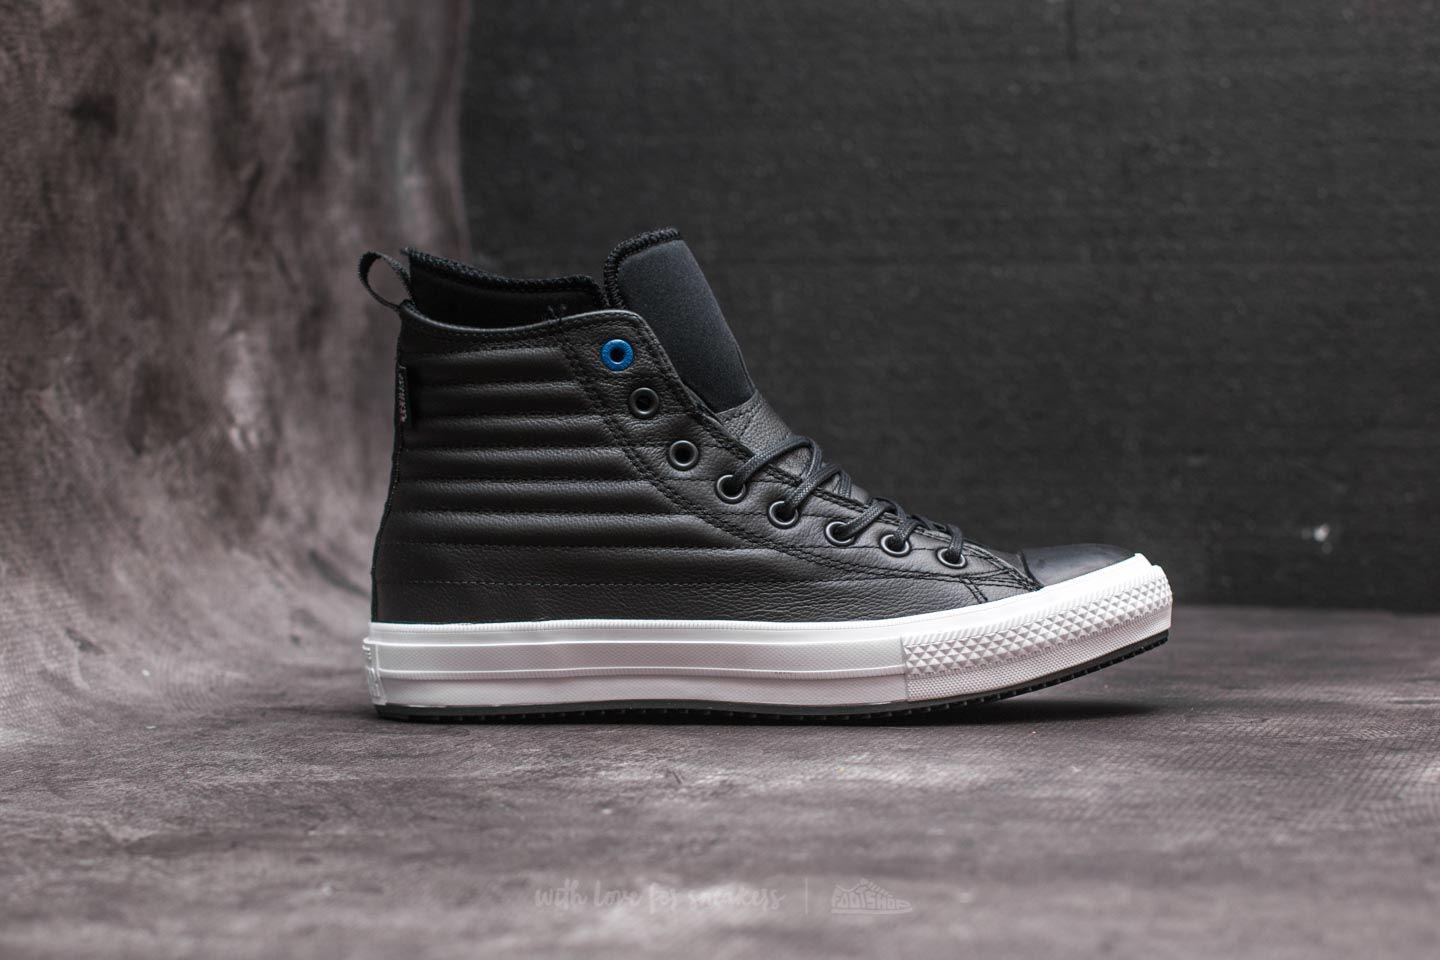 converse chuck taylor all star waterproof boot quilted leather canada